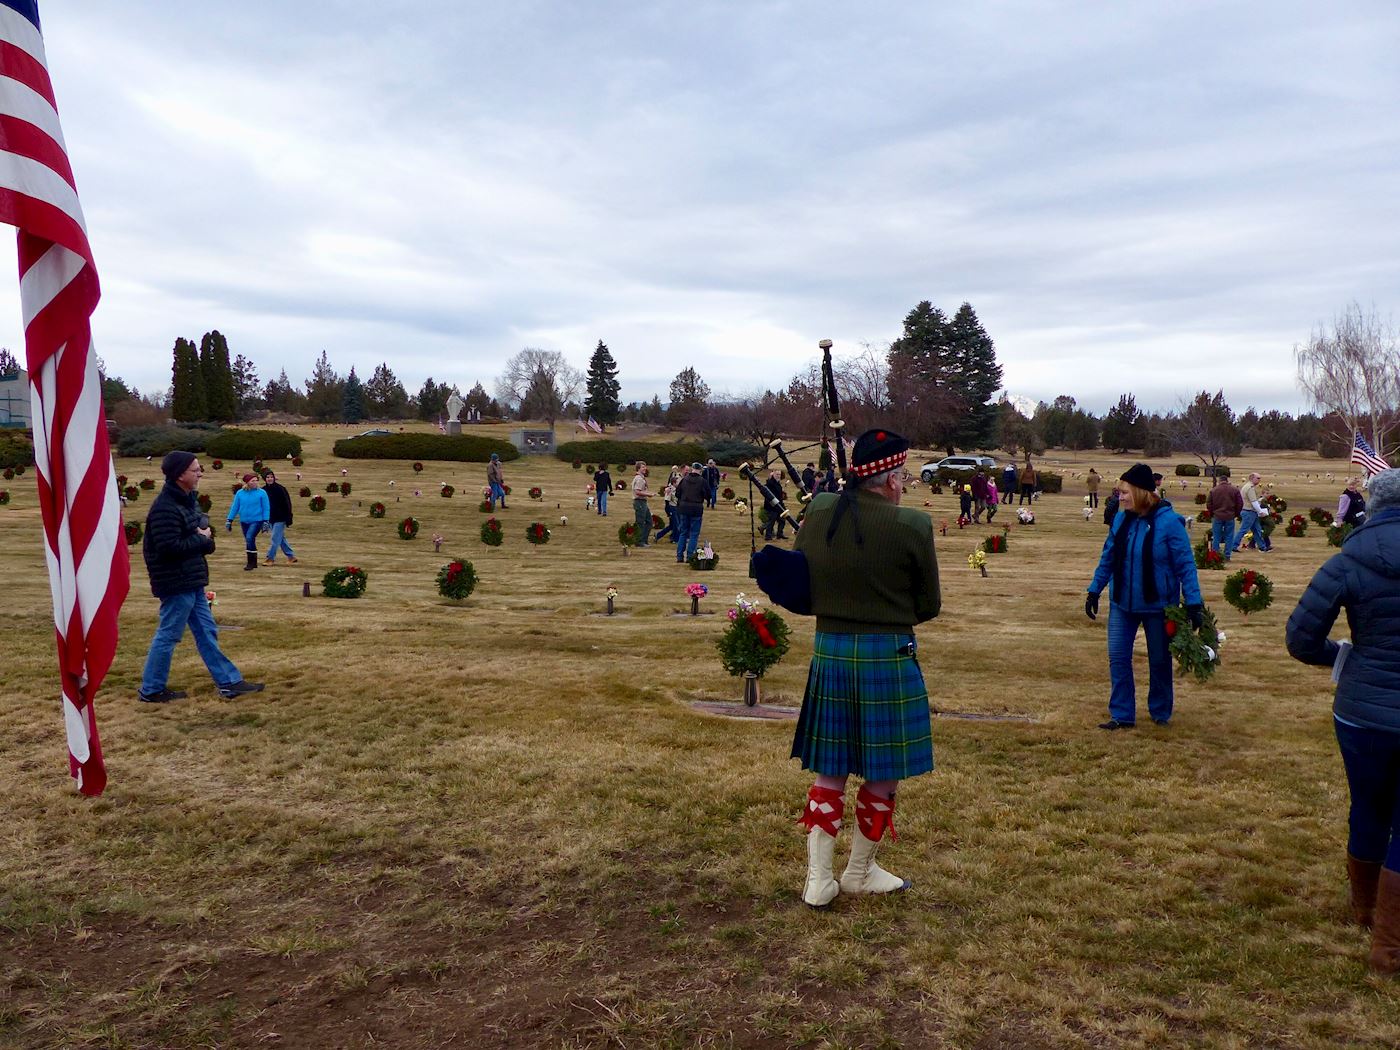 Steve Allely at bagpipers while wreaths are being laid.